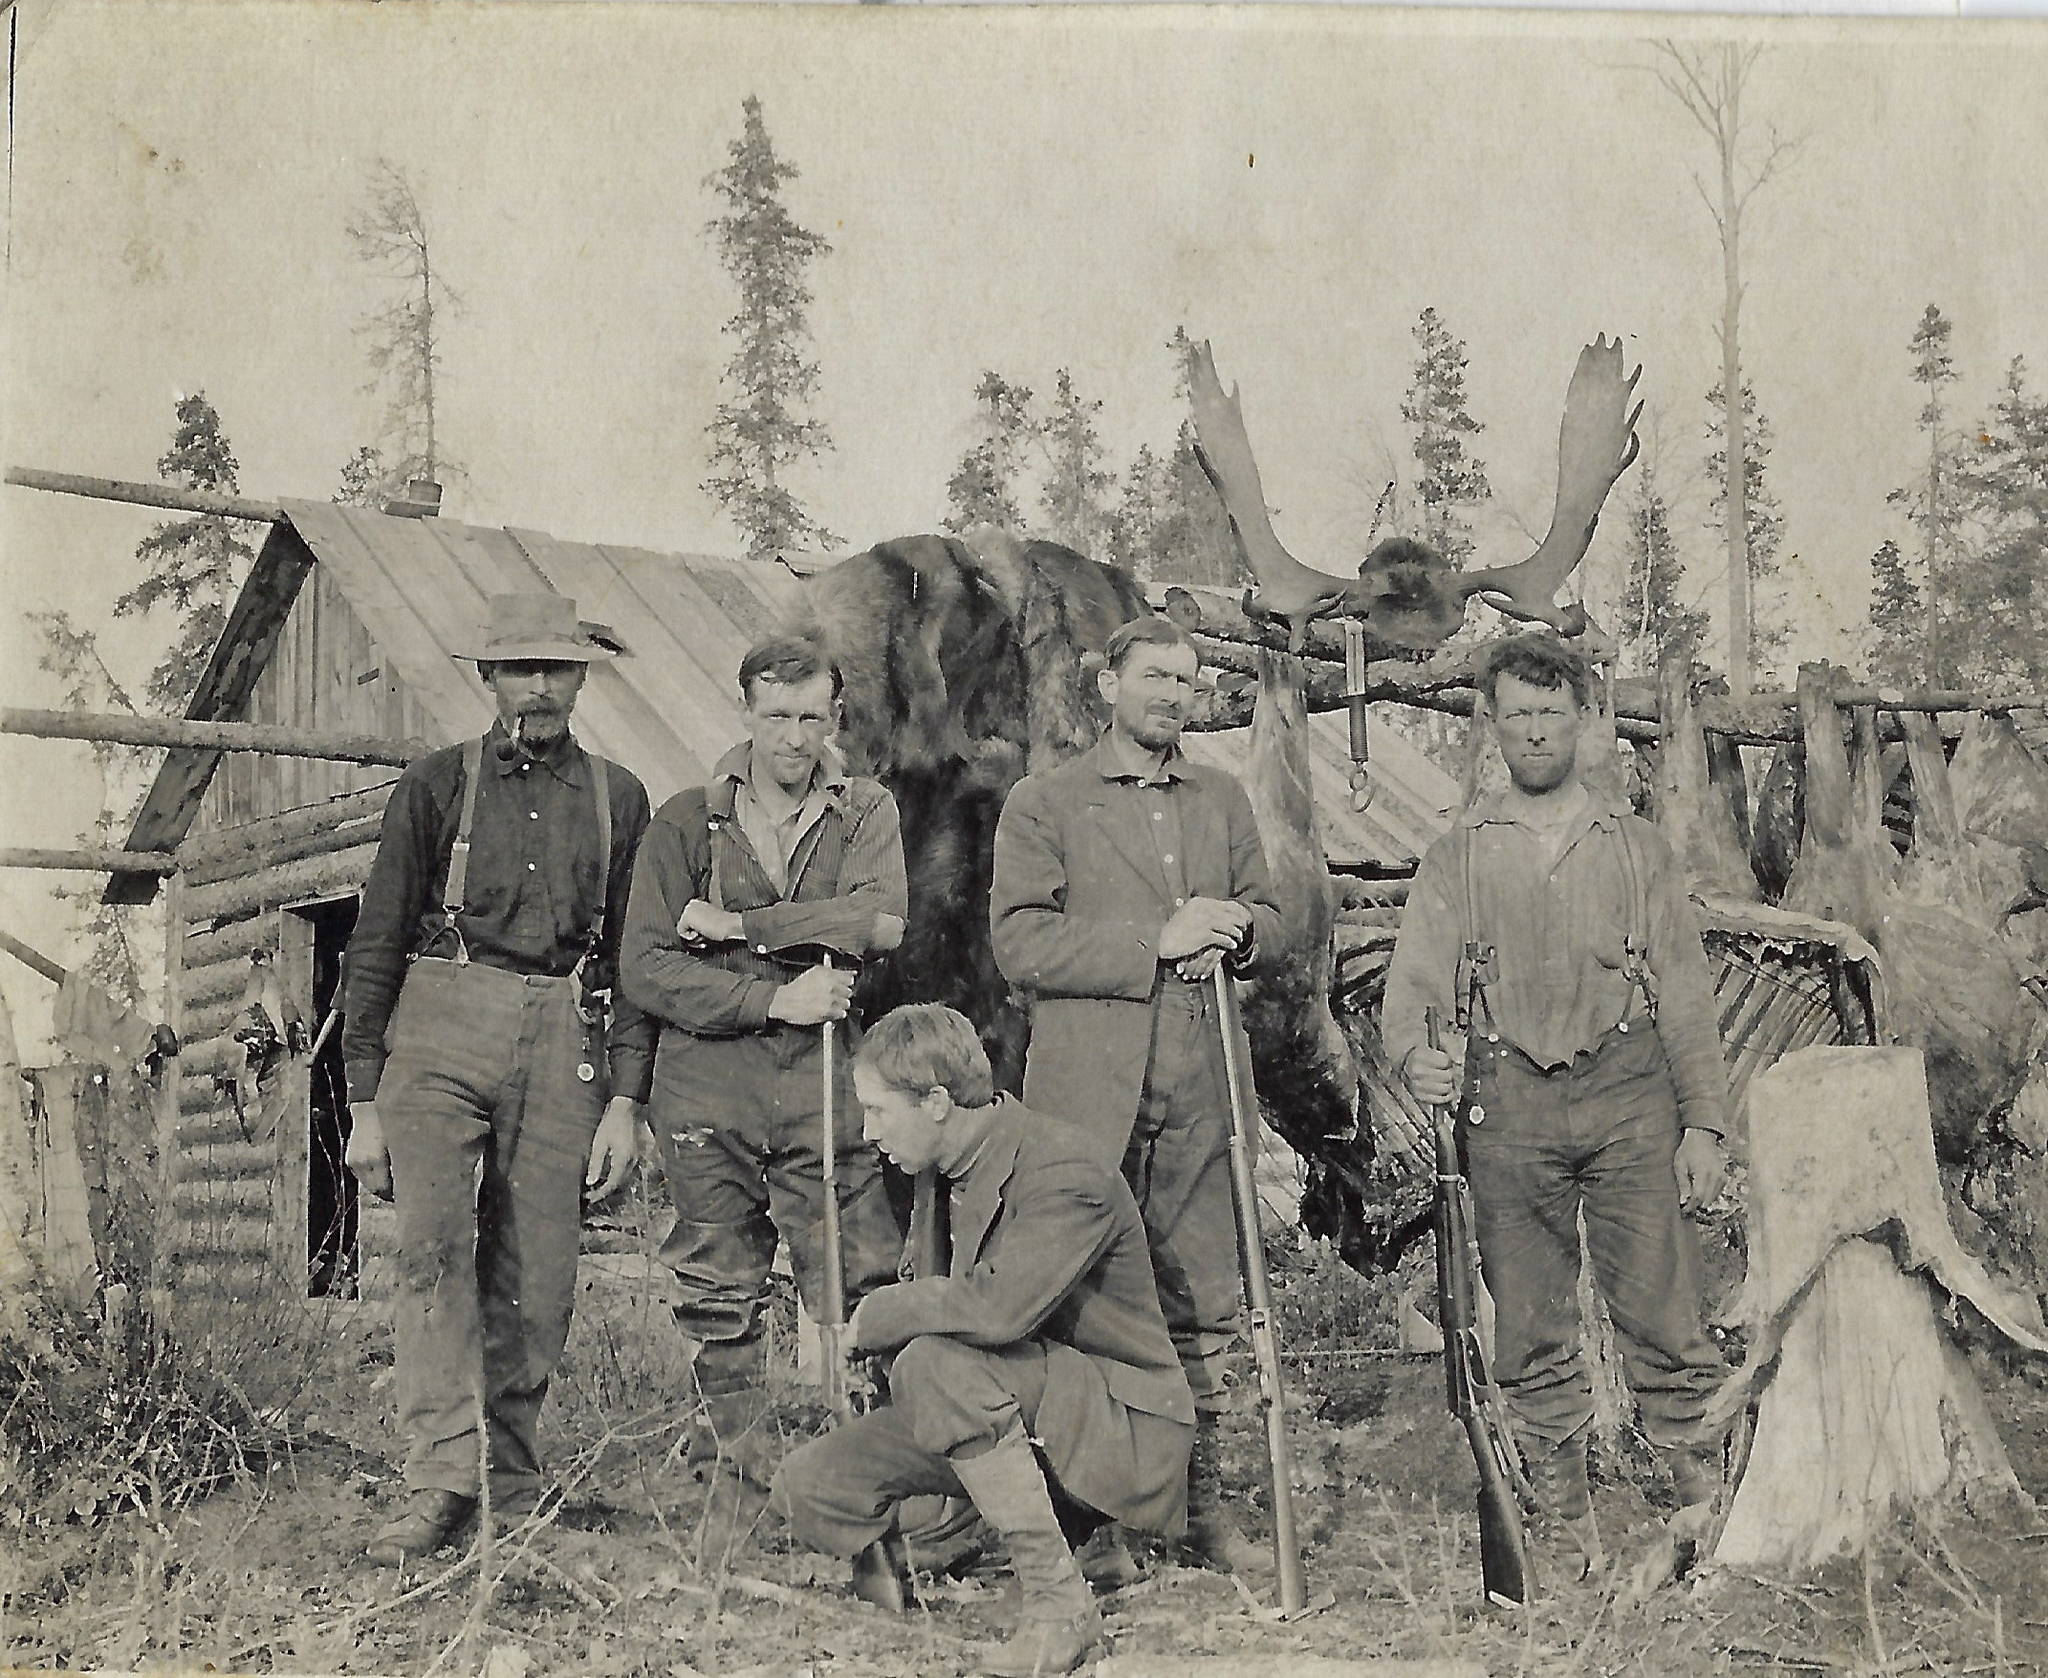 Ed Haun (kneeling) poses with a group of other hunters and several hanging quarters of moose meat, circa late 1910s. The structure may be the “Hauns cabin” near the Chickaloon River, referred to in a 1914 ranger’s diary. (Courtesy of the Hope and Sunrise Historical Society)